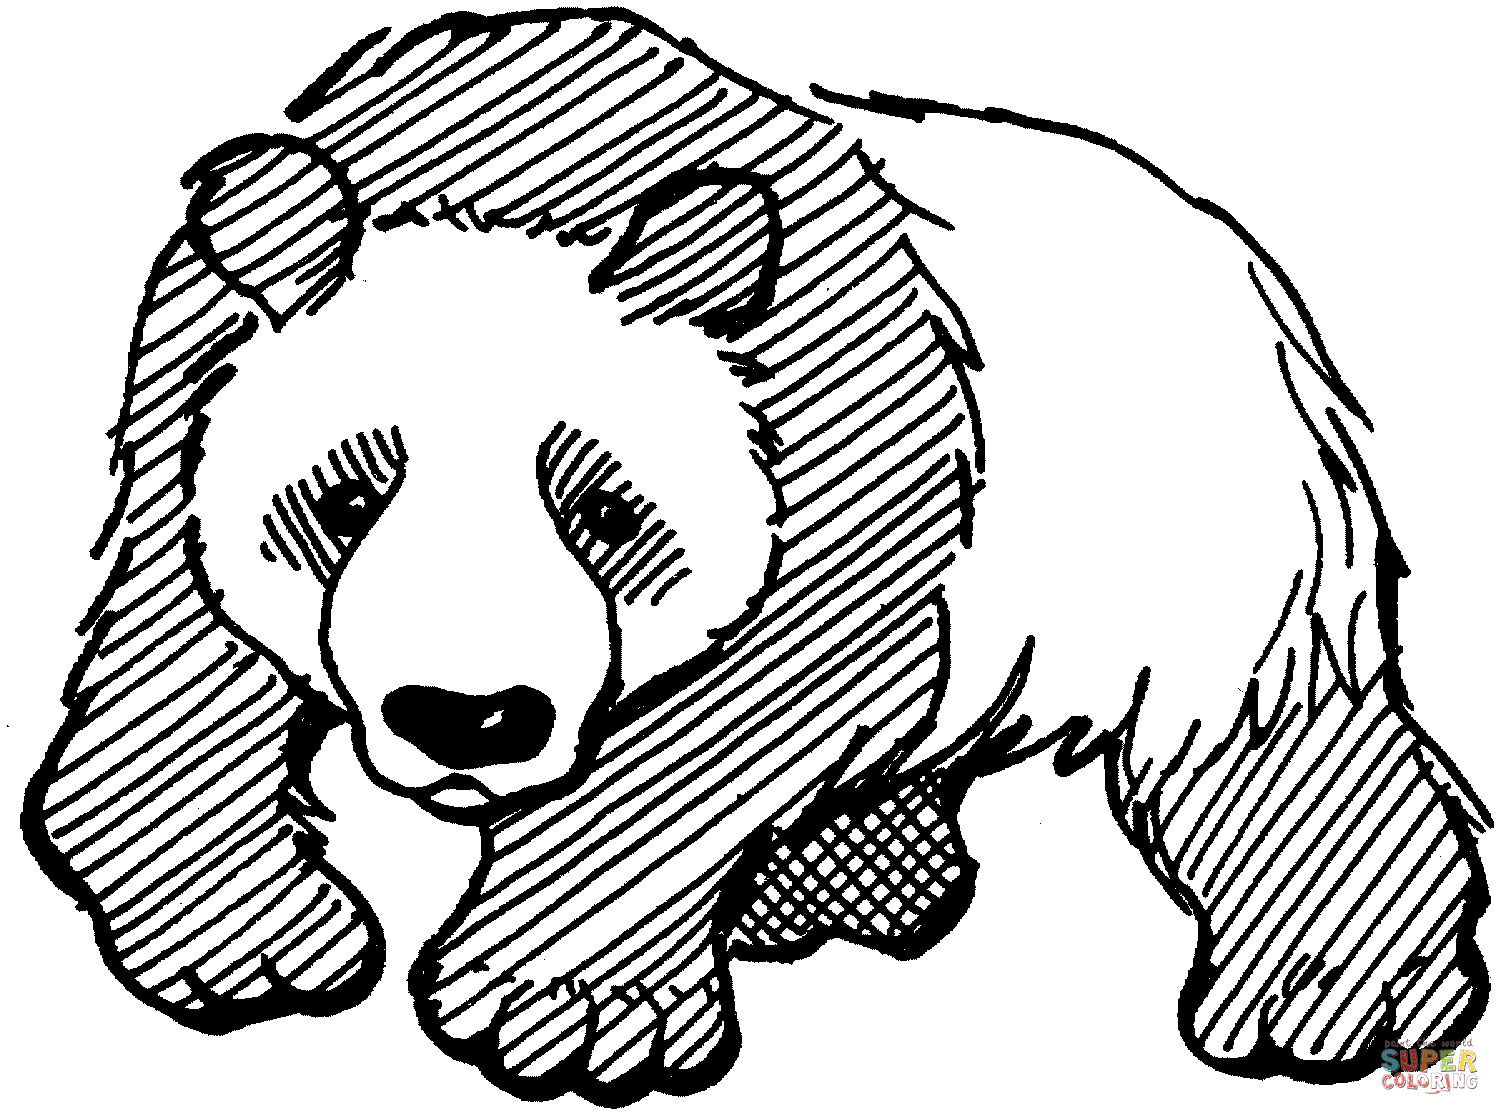 Panda Coloring Pages For Adults
 Panda Coloring Pages For Adults Coloring Home